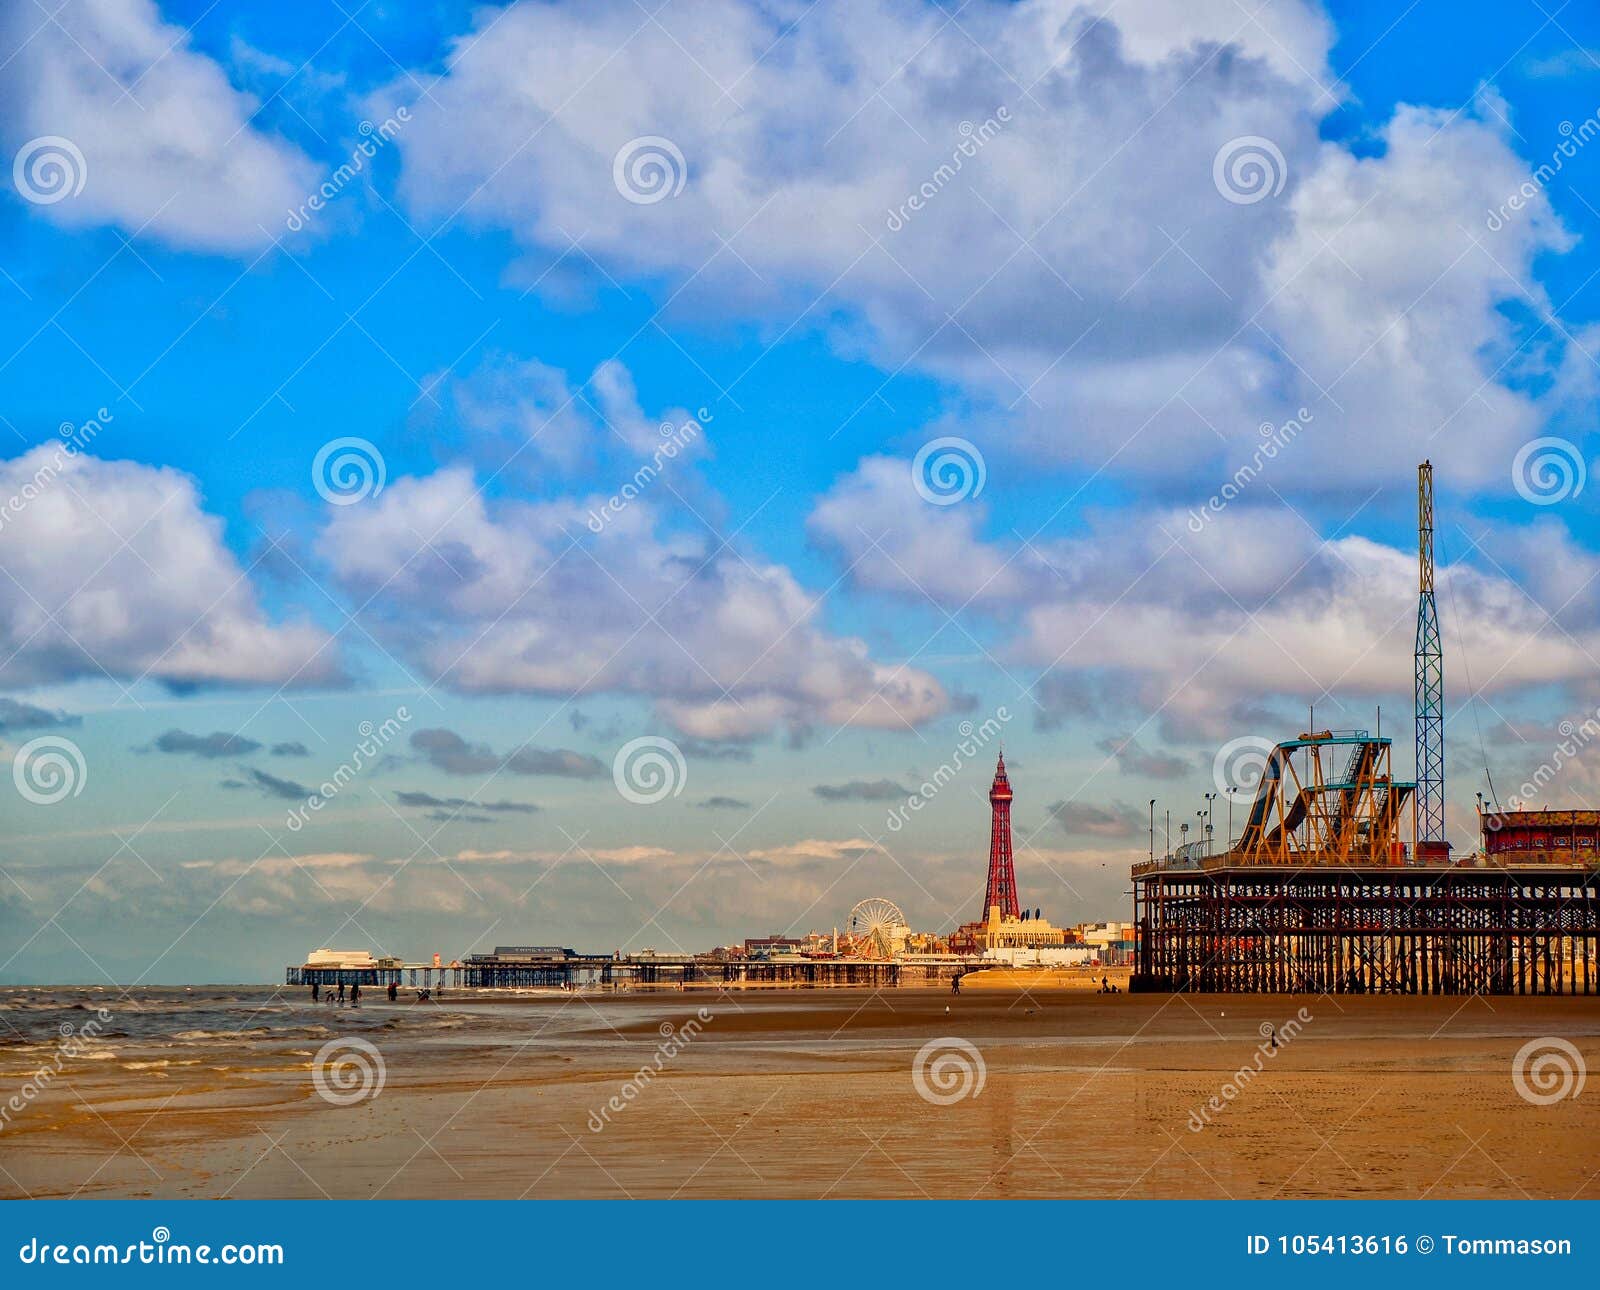 blackpool piers and tower